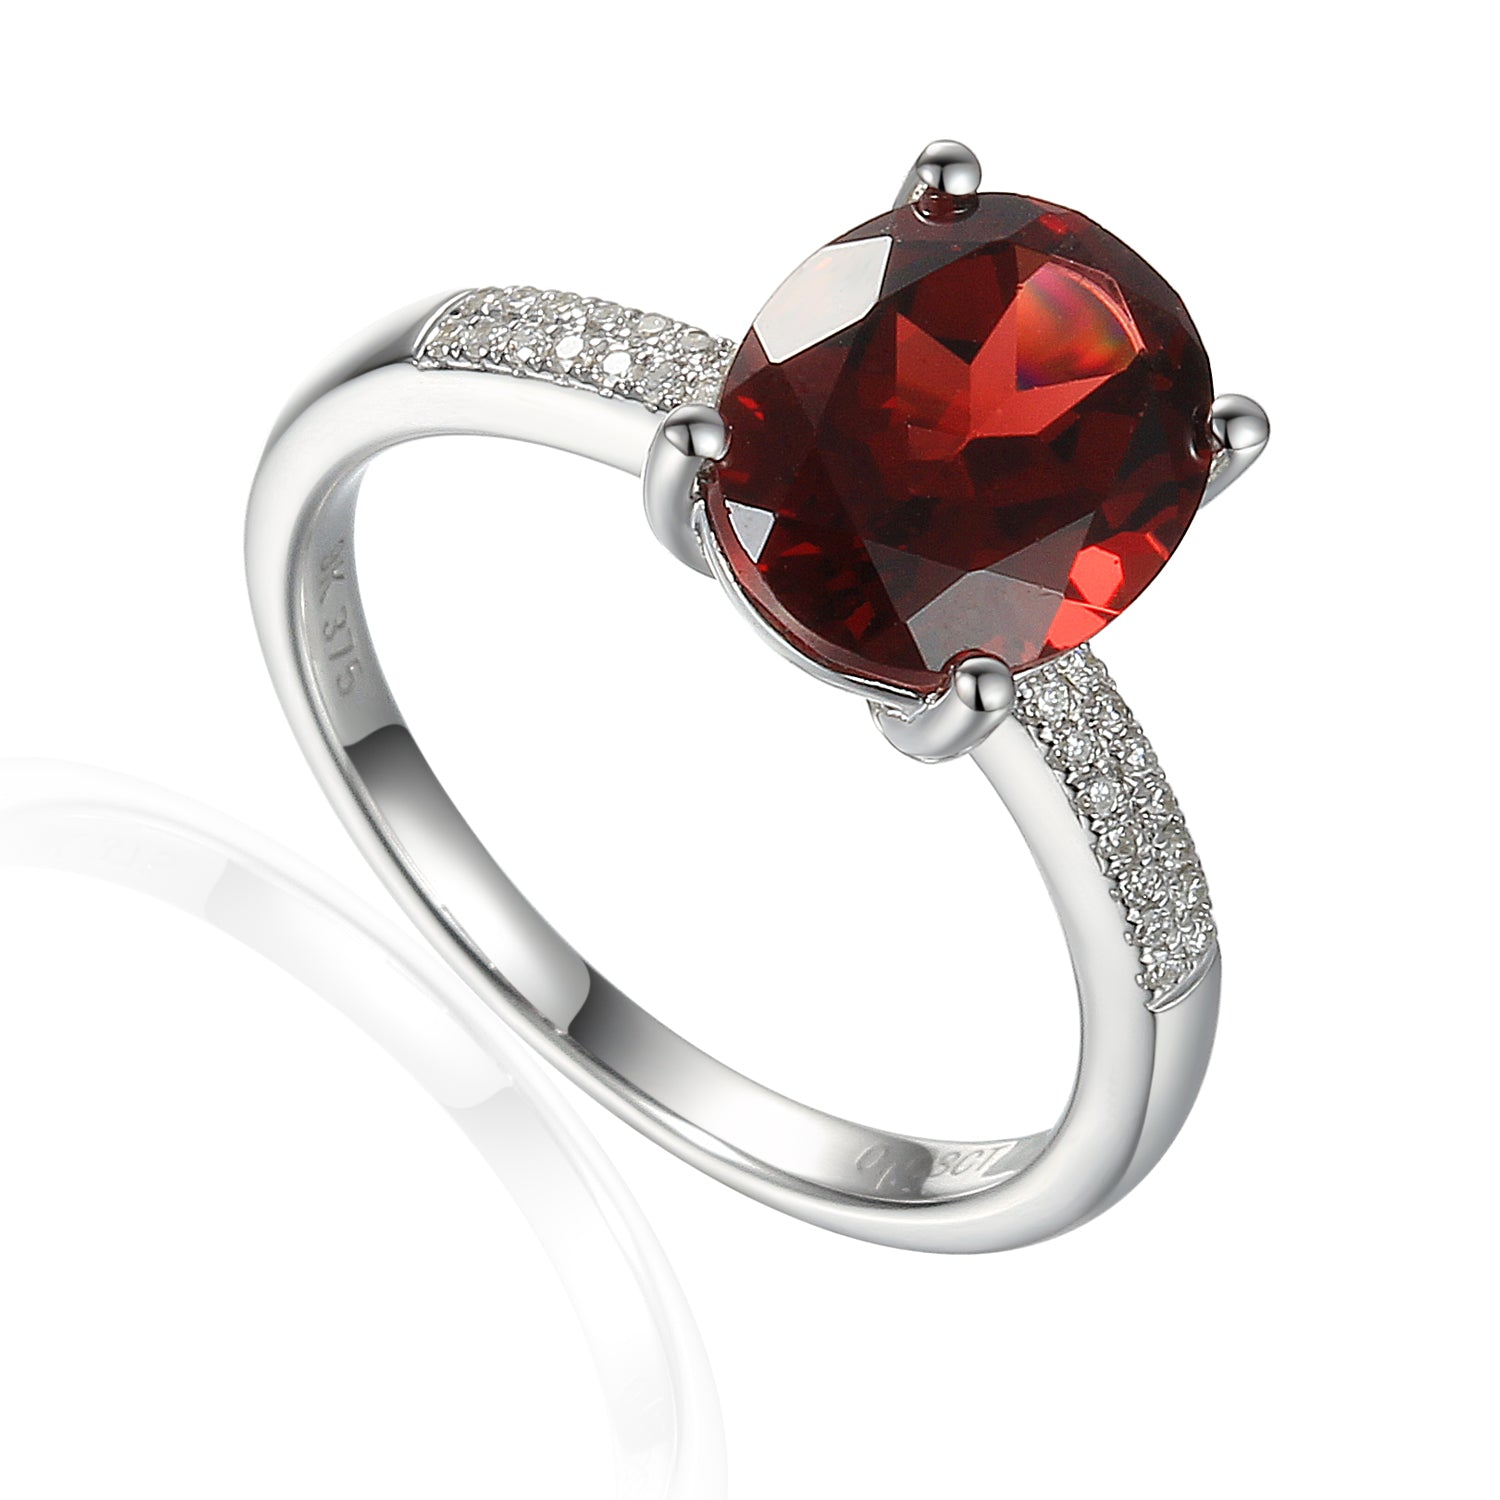 Oval Gemstone Ring with Pave Diamond Shoulders